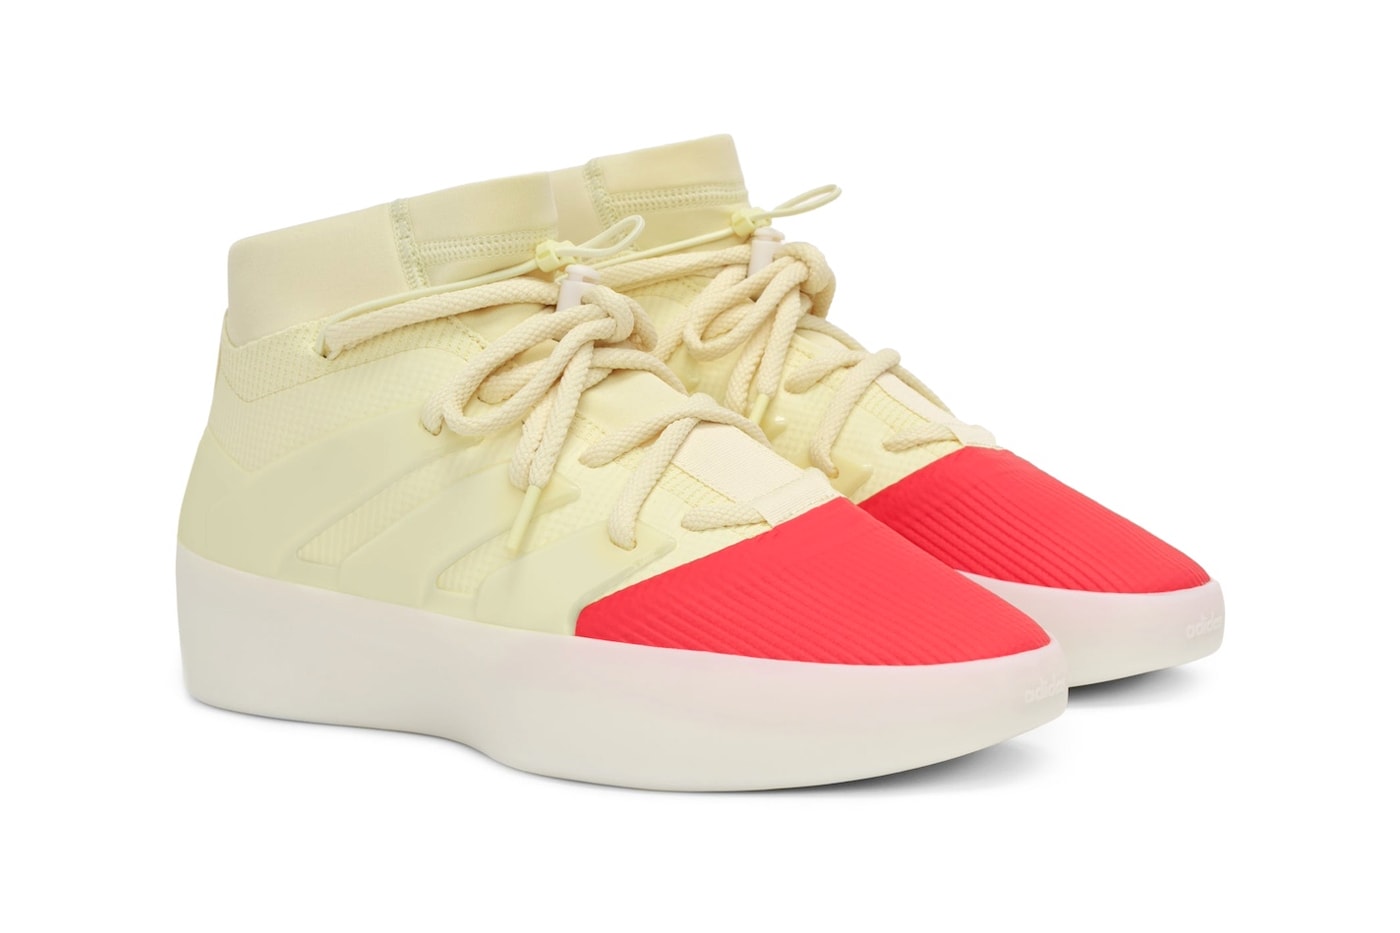 Fear of God Athletics 1 "Desert Yellow/Indiana Red" Releases This Spring IH5906